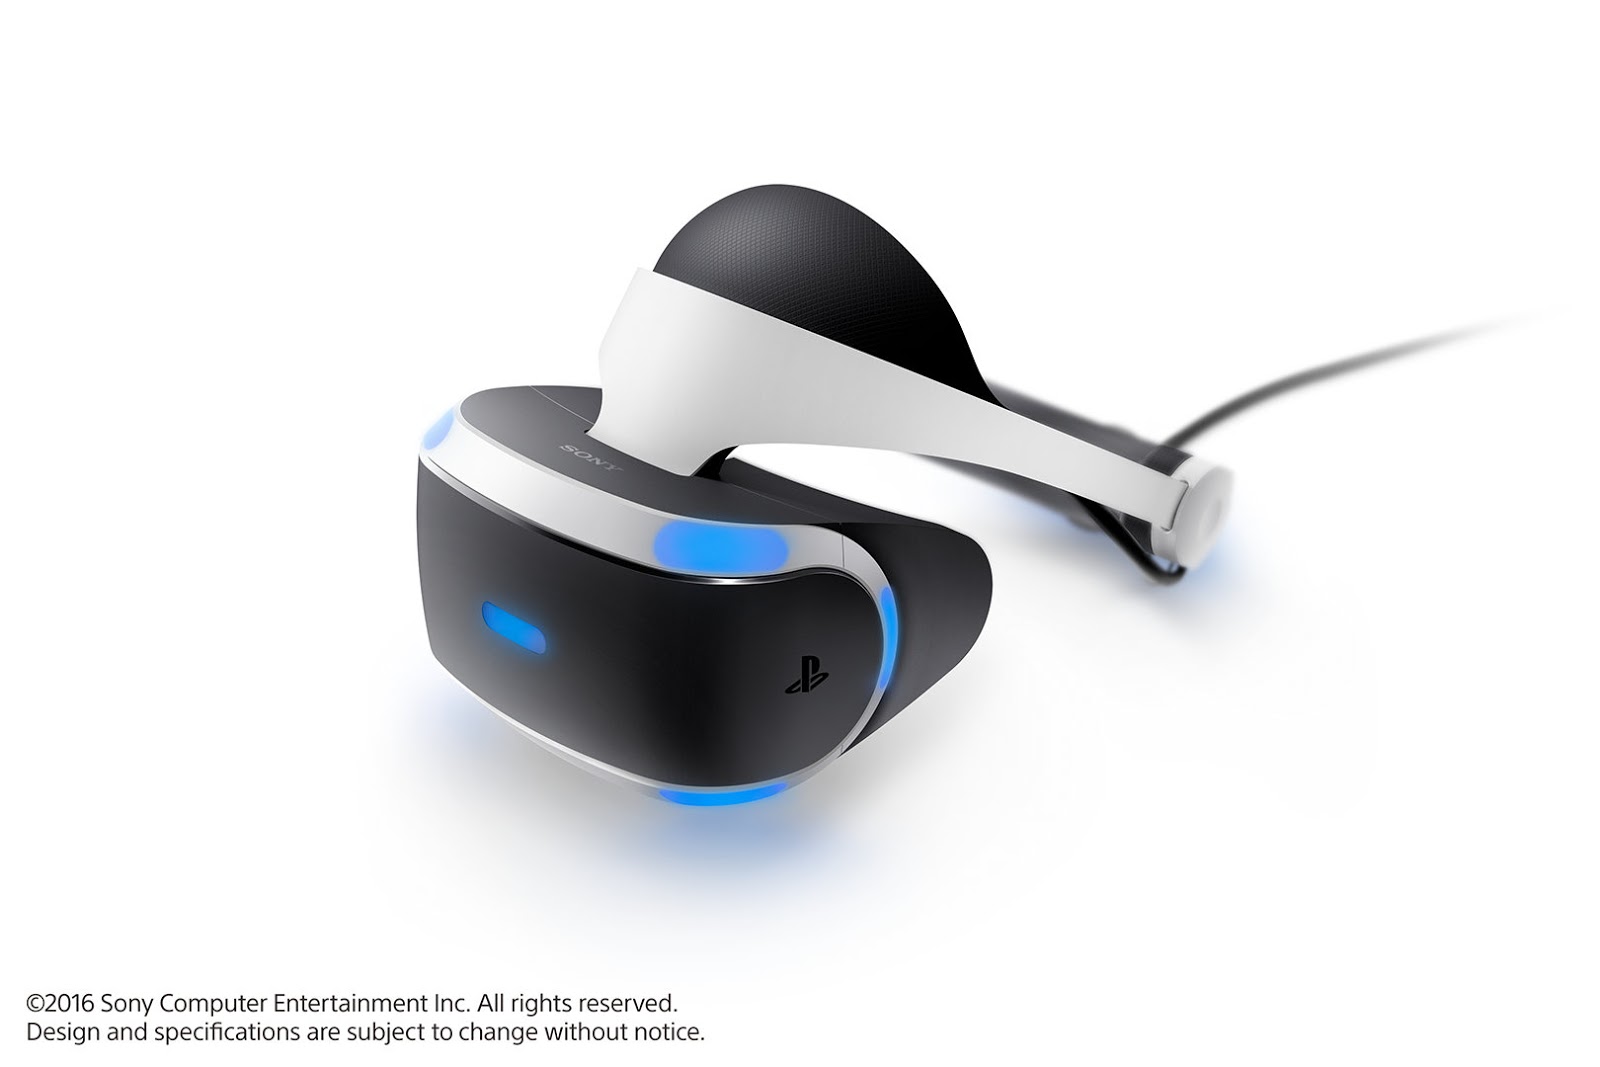 Sony's PlayStation VR headset is coming to Malaysia on October 13 for